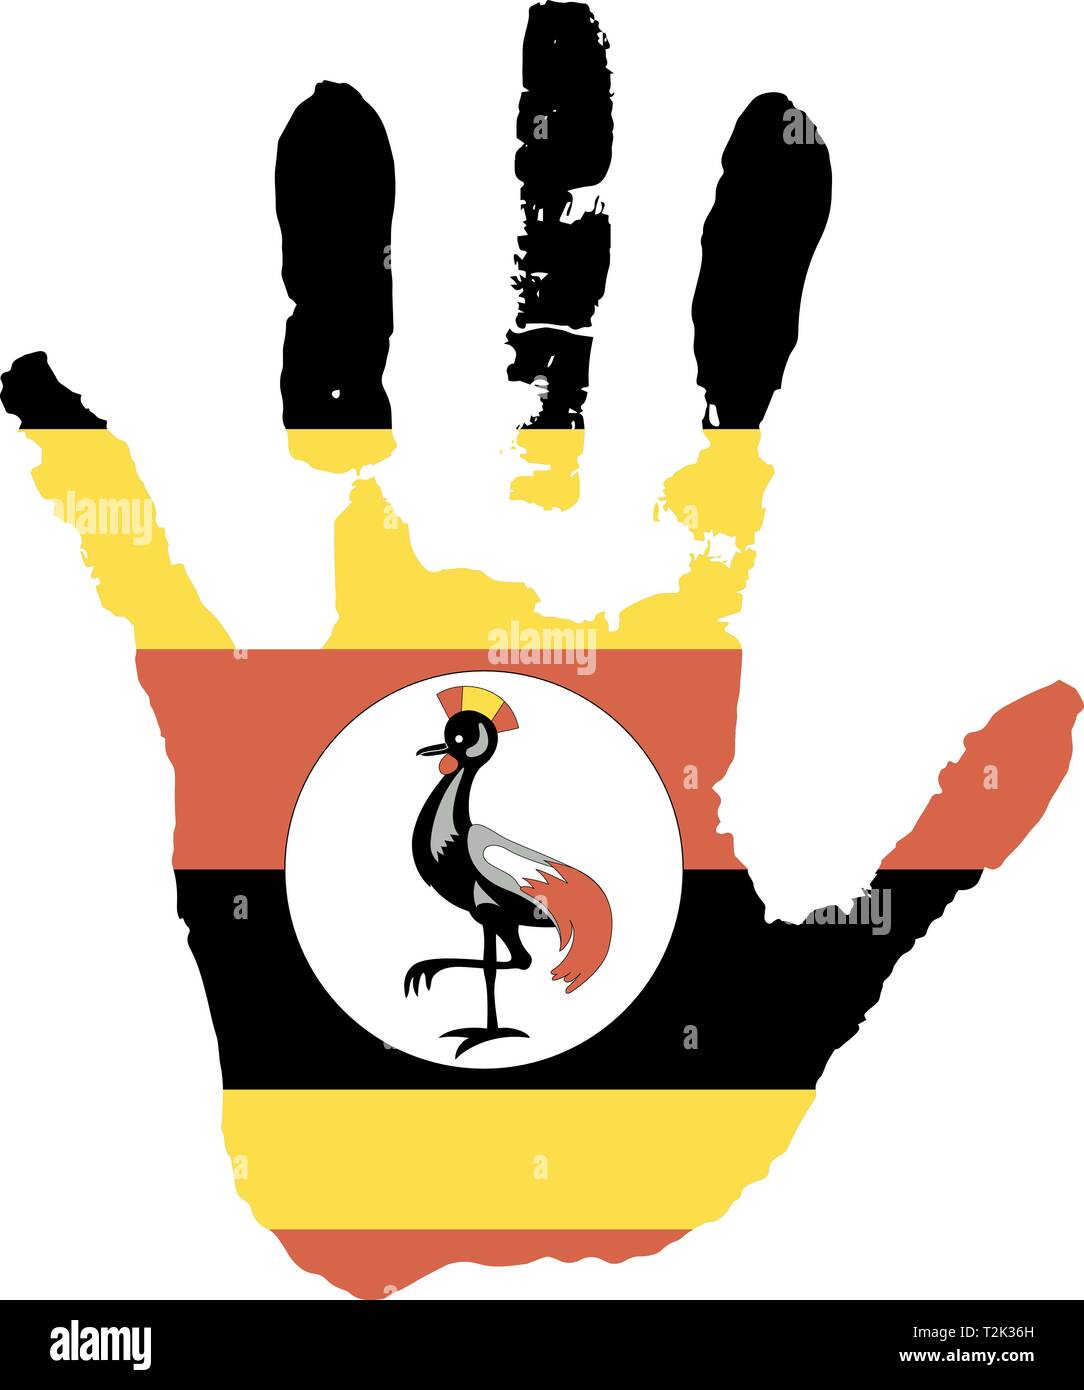 red, white, black color of the flag. vector handprint in the form of the flag of Uganda. Stock Vector